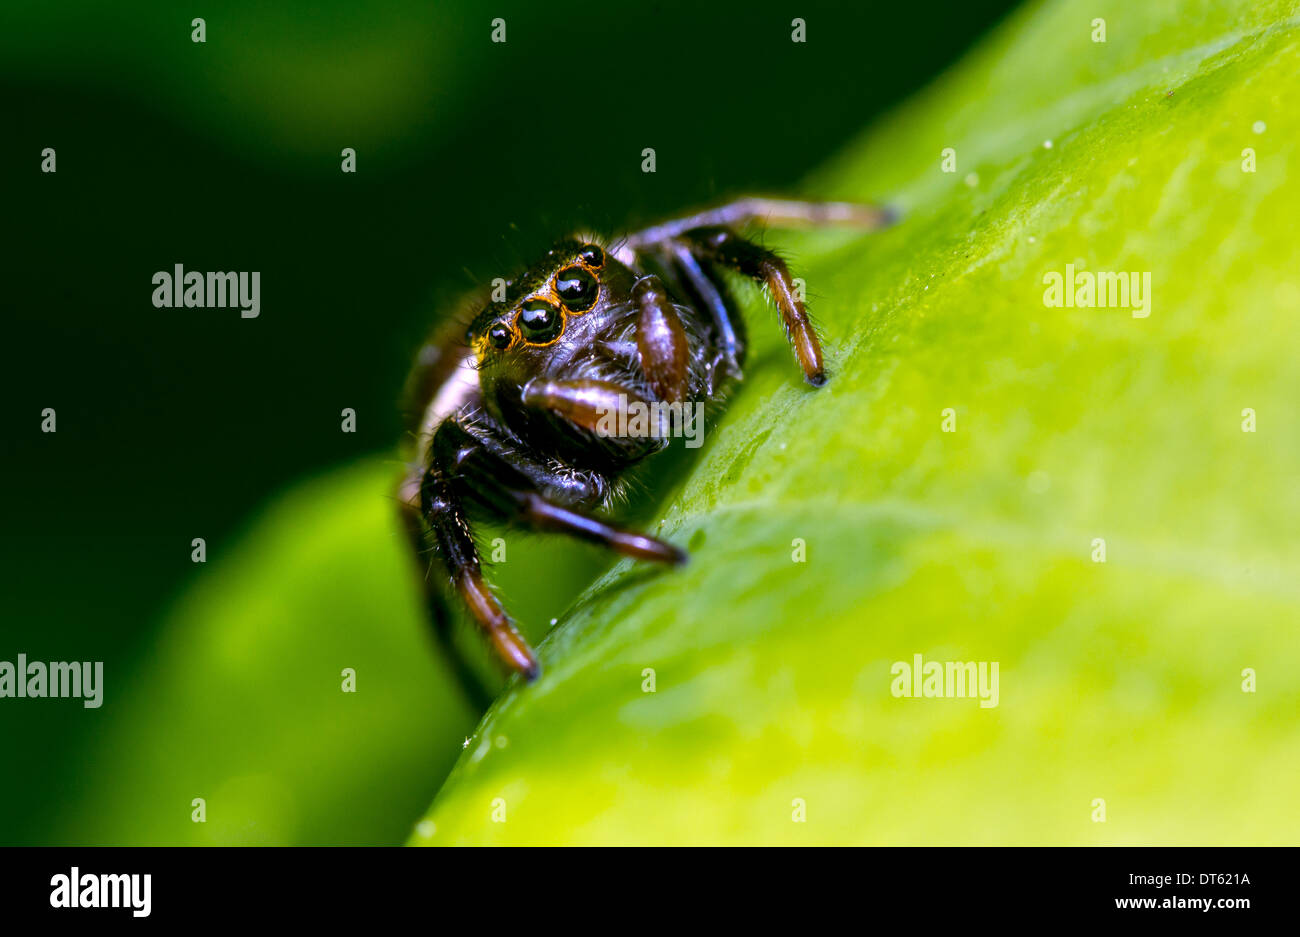 The jumping spider family (Salticidae) contains more than 500 described genera and about 5,000 described species Stock Photo